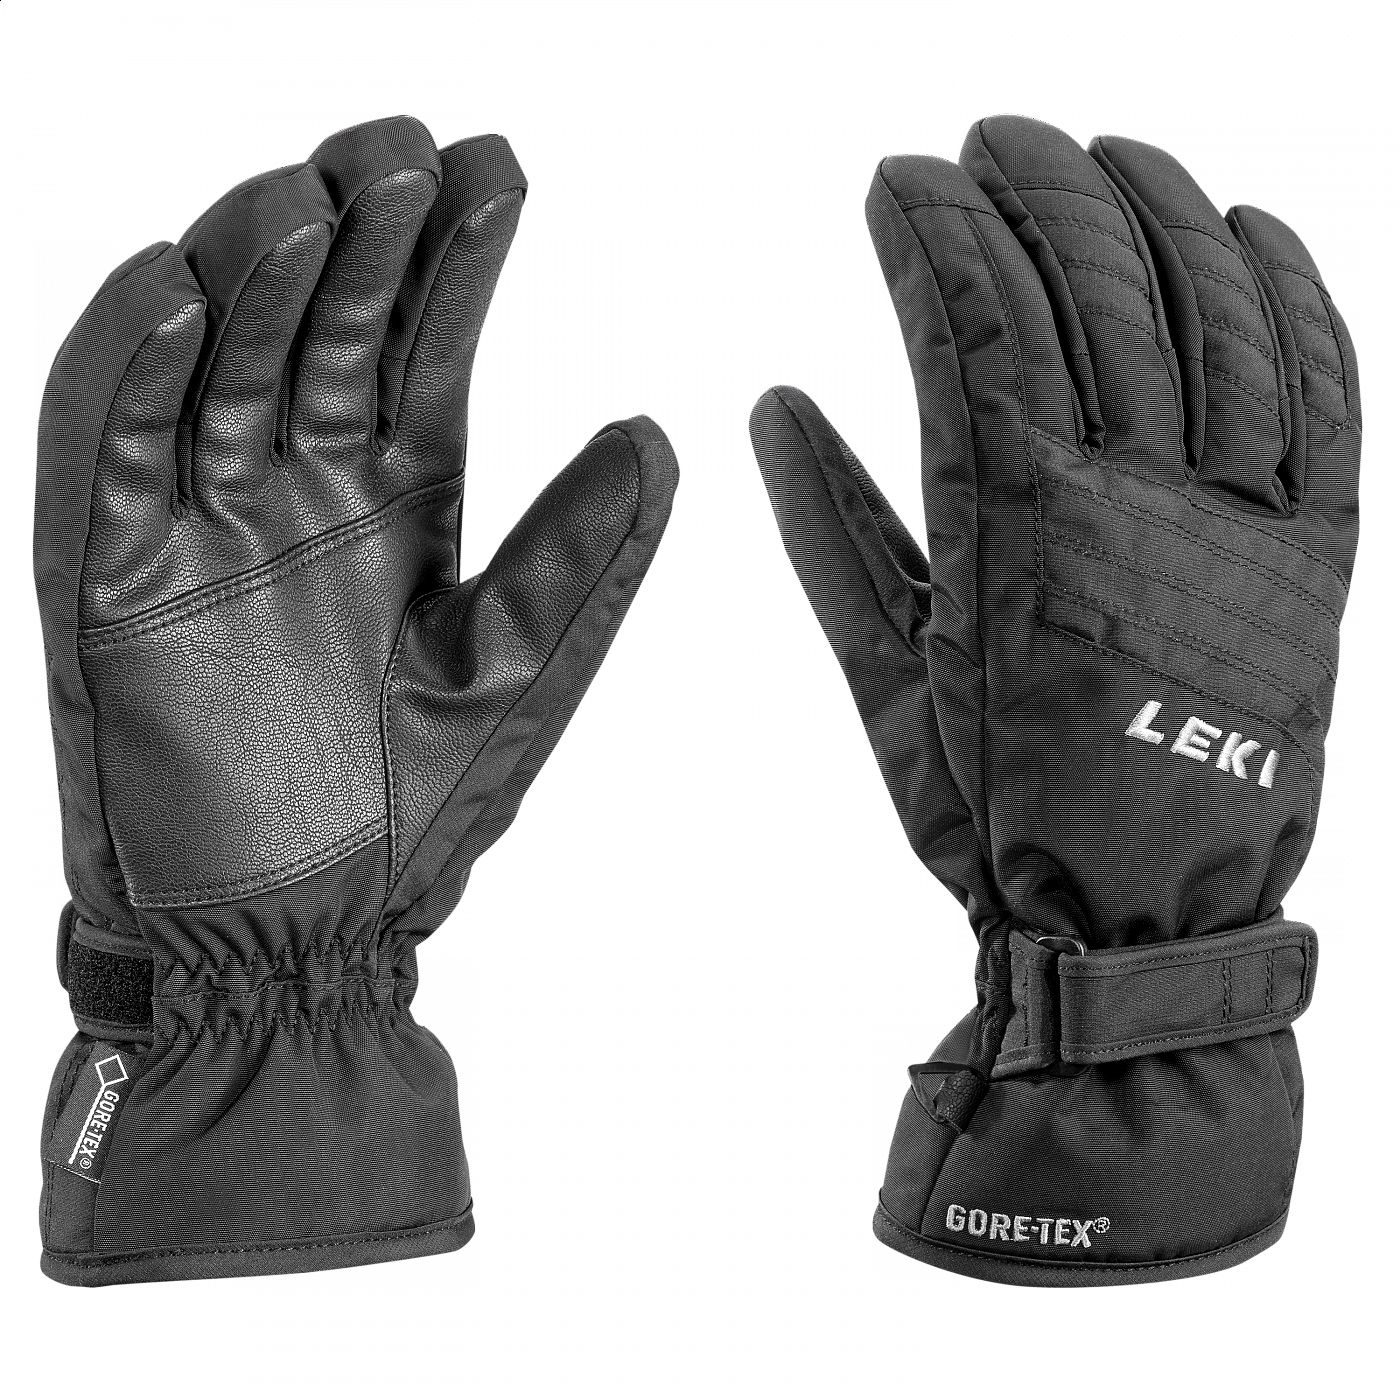 Image of gloves for sale